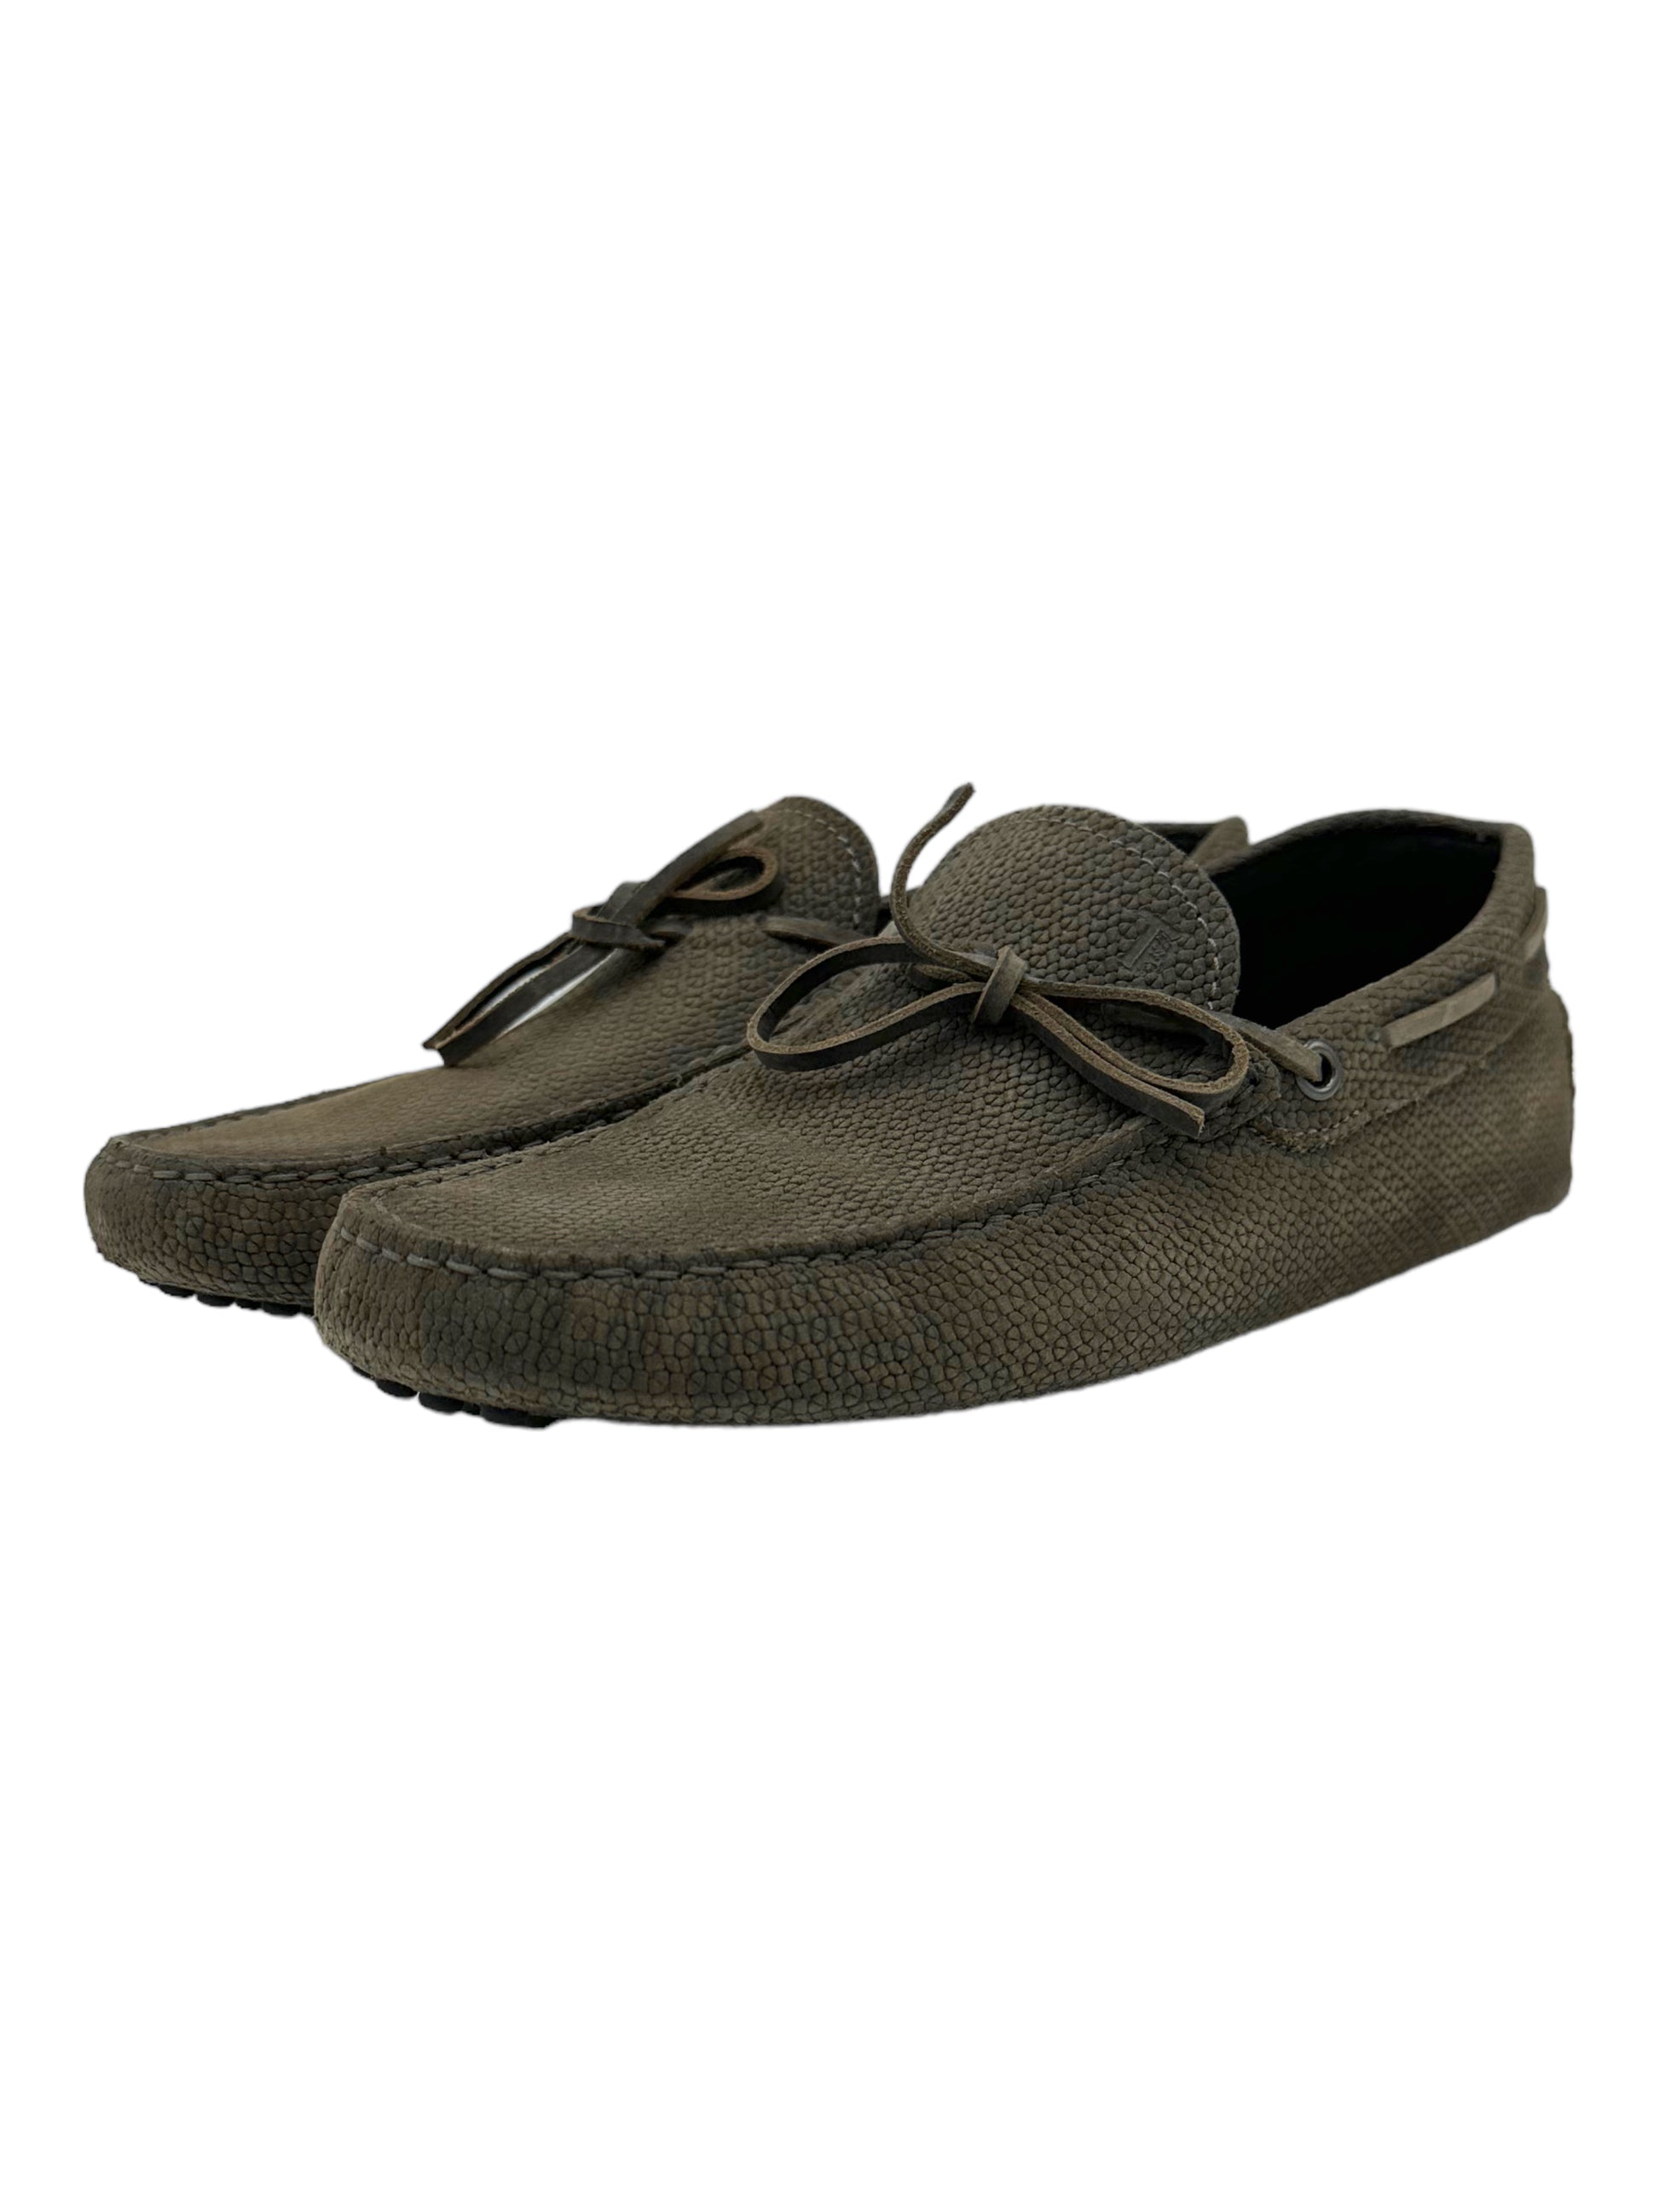 Tods Dark Brown Pebbled Leather Moccasin Driving Loafers - Genuine Design Luxury Consignment Calgary, Alberta, Canada New and Pre-Owned Clothing, Shoes, Accessories.